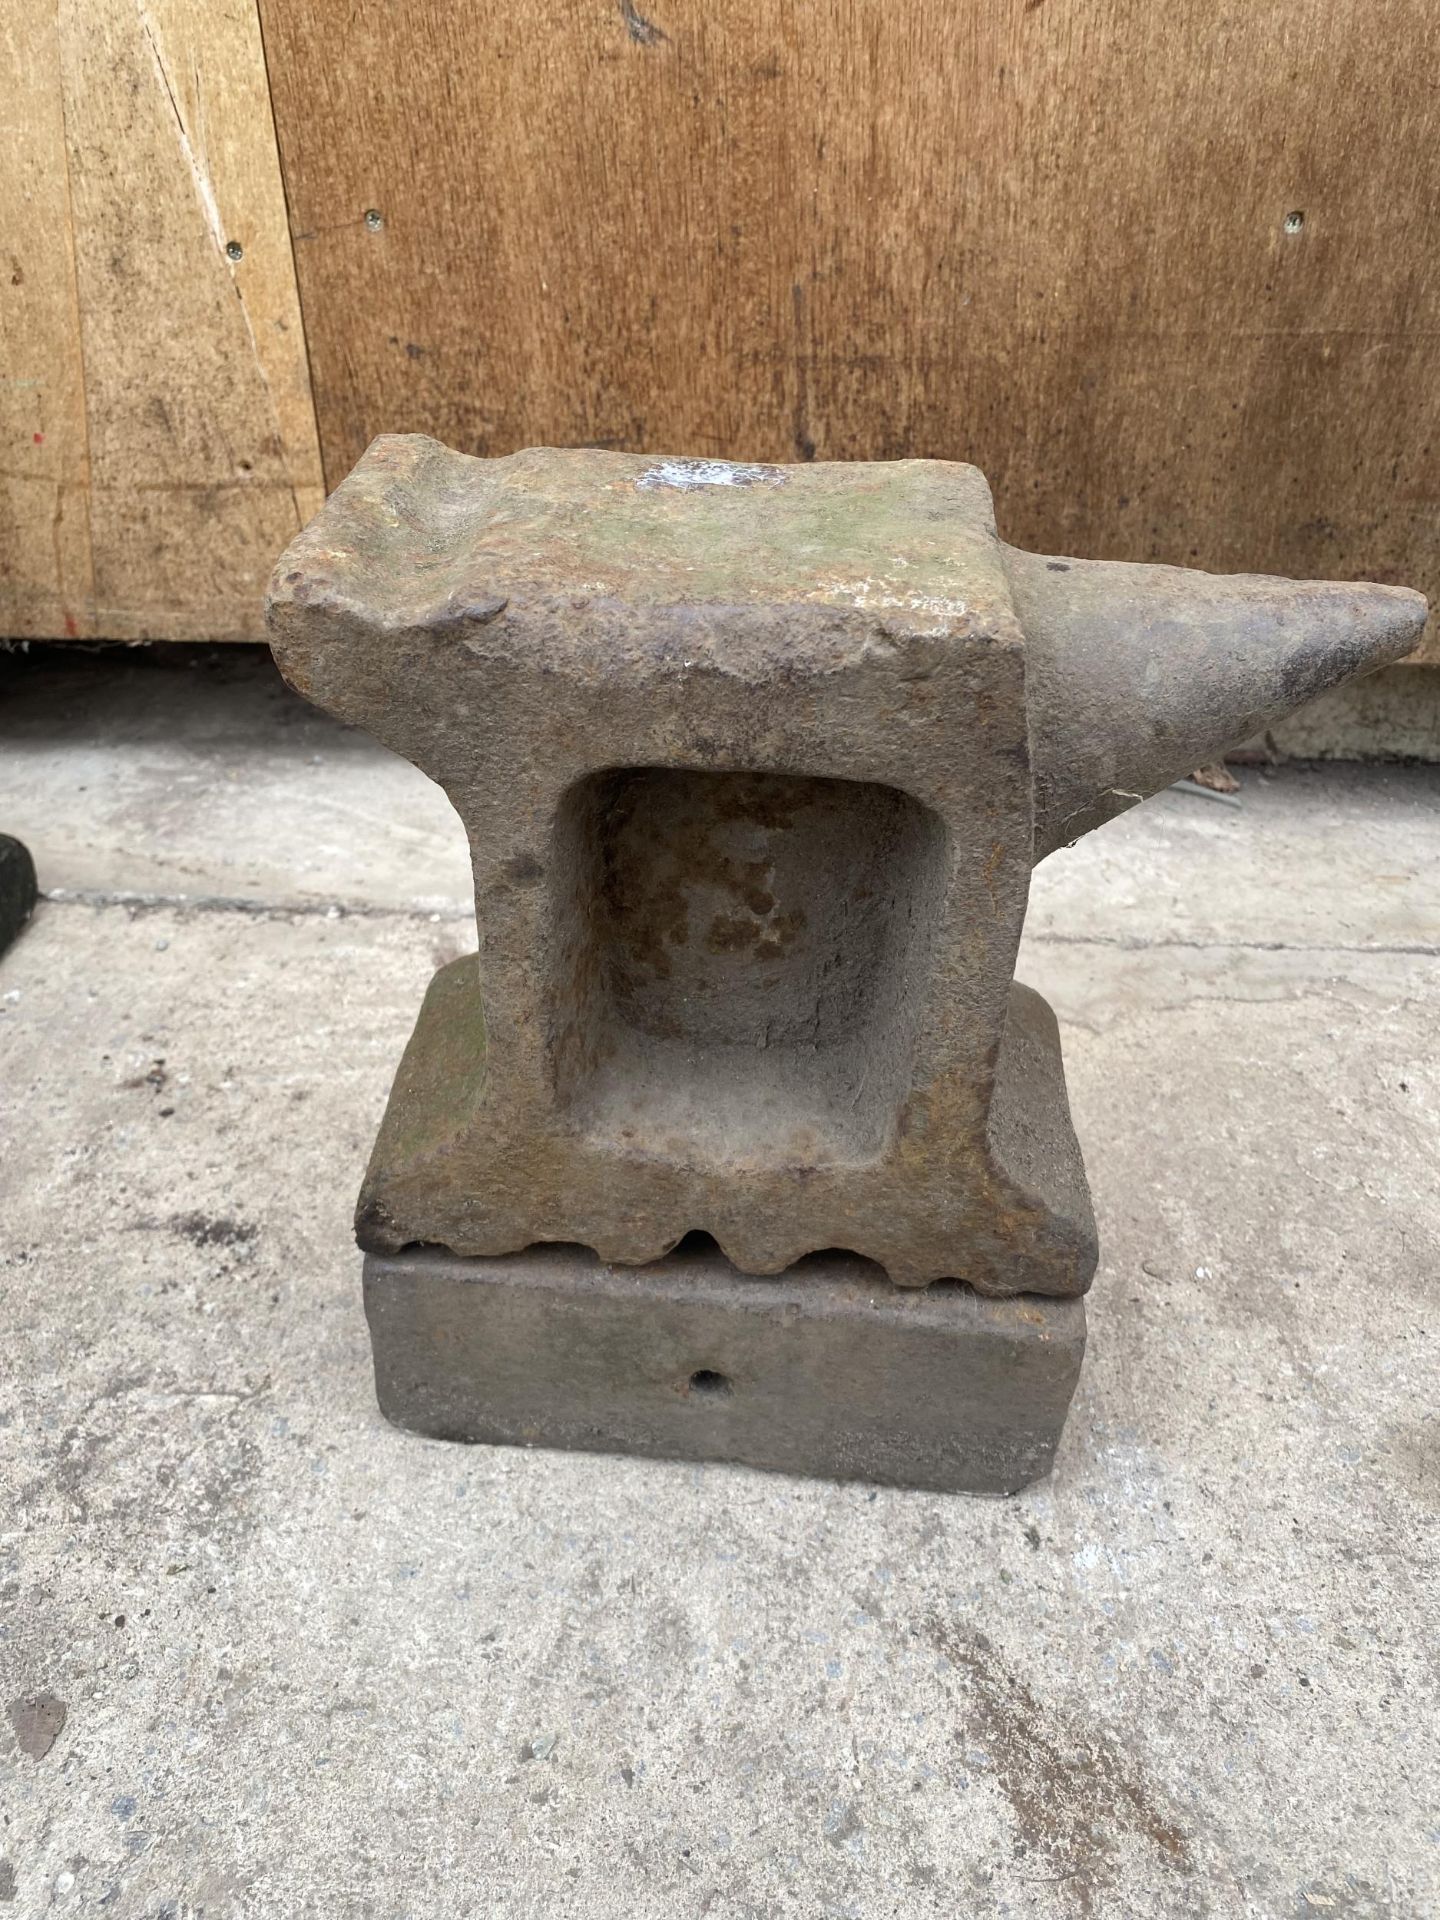 A SMALL VINTAGE CAST IRON DOUBLE SIDED BLACKSMITHS ANVIL WITH CAST IRON BASE STAND(H:25CM L:28CM)